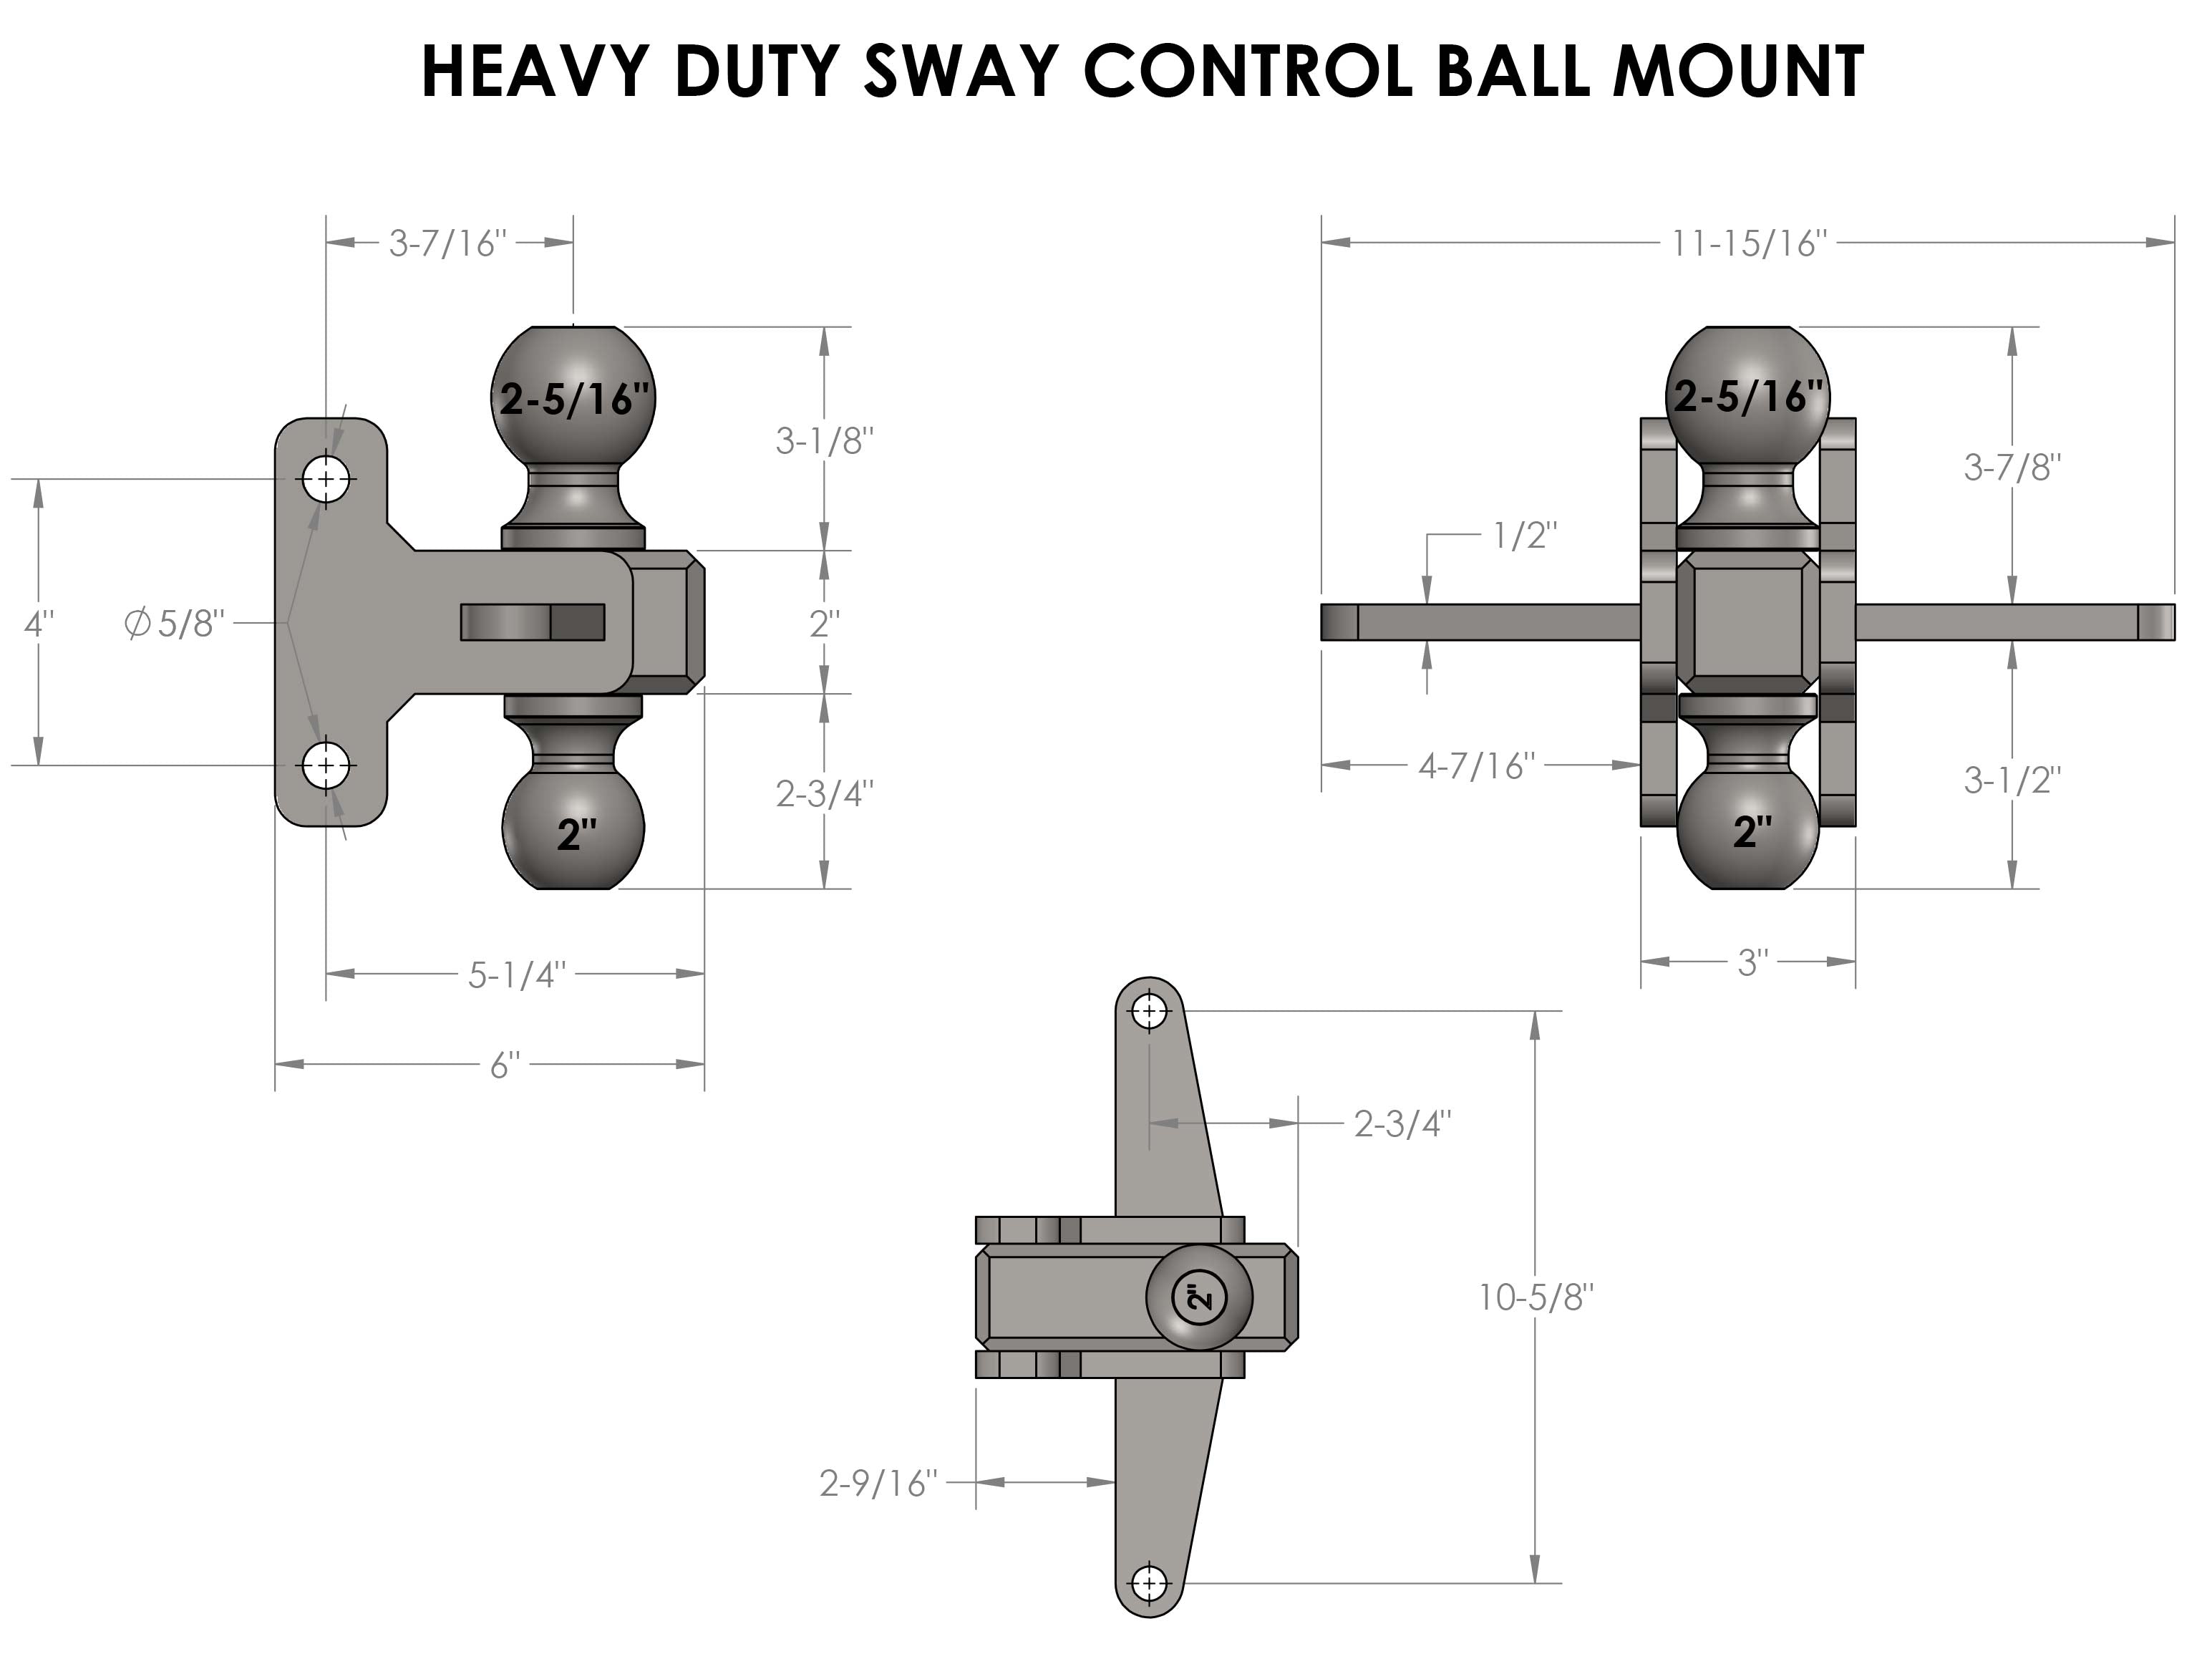 BulletProof Heavy/Extreme Duty Sway Control Ball Mount Design Specification